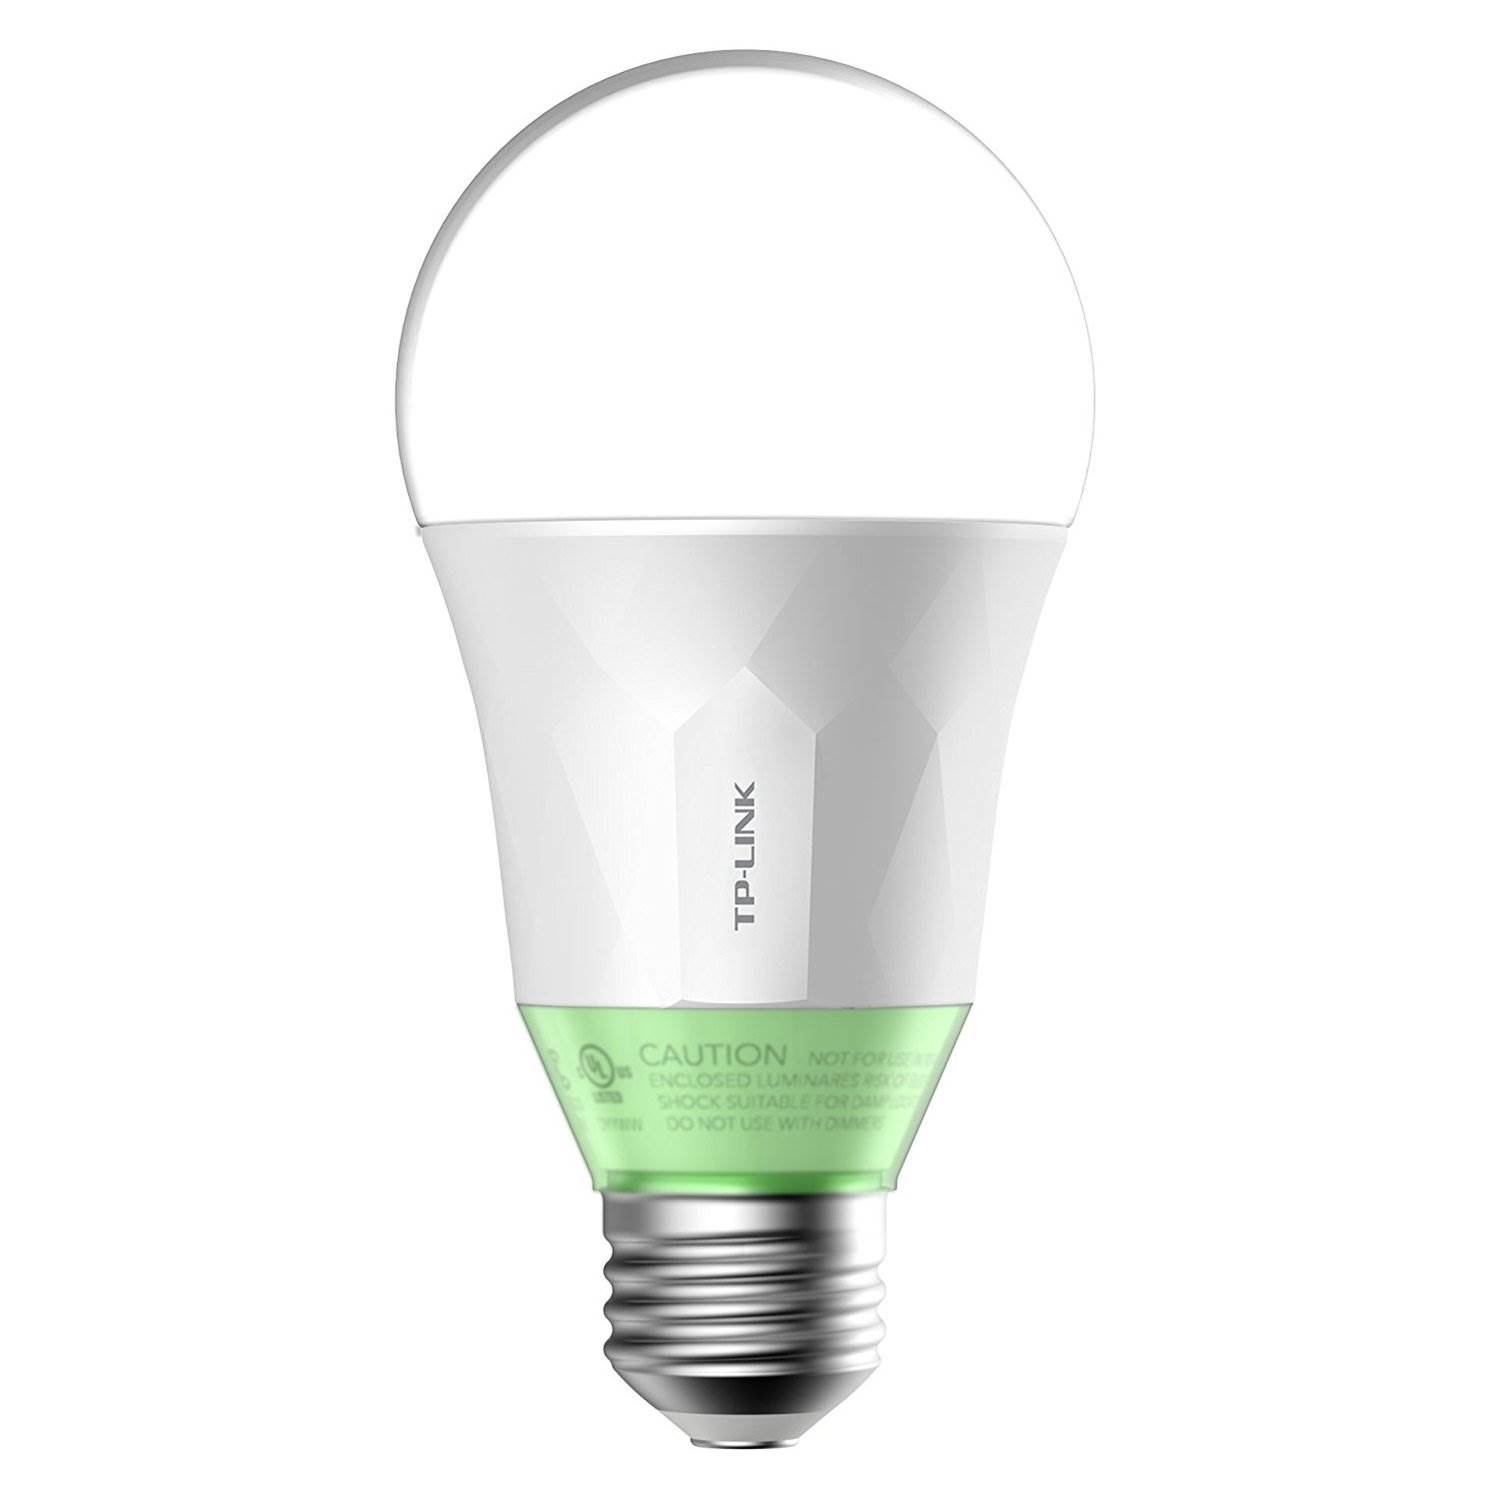 TP-Link 60W Energy Saving Smart Wi-Fi LED Light Bulb with Dimmable Light | LB110 - image 1 of 6